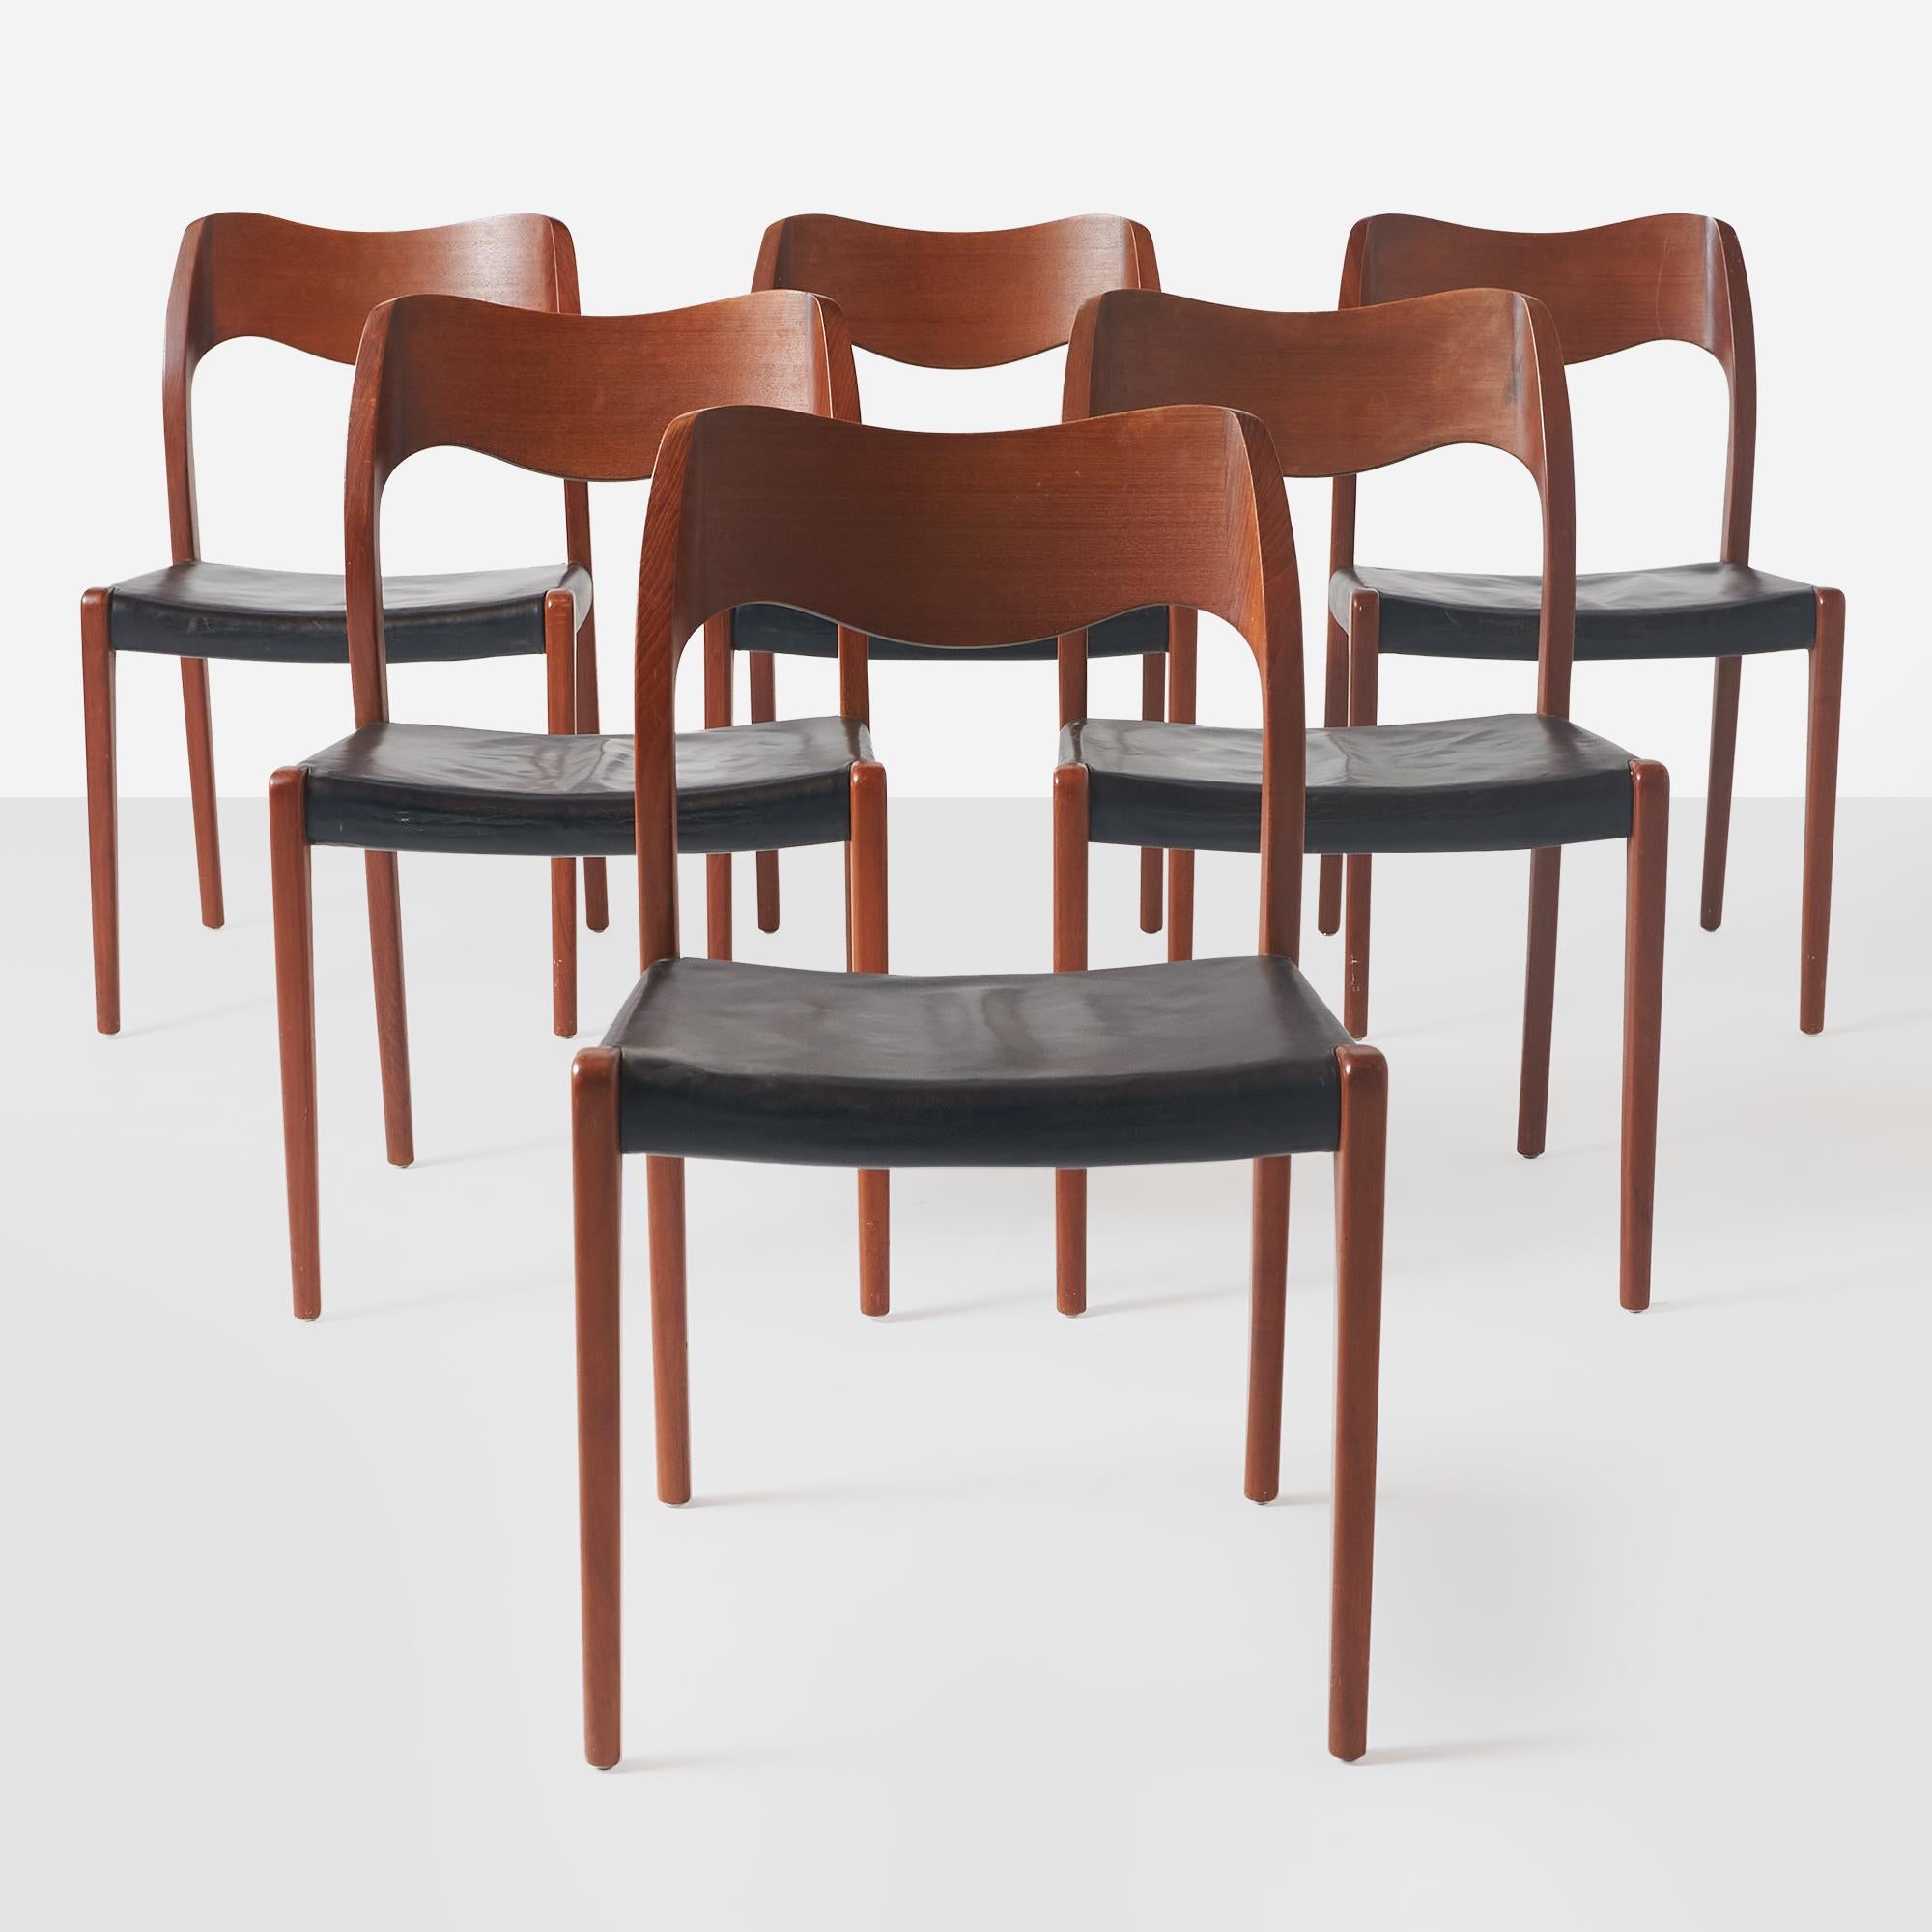 A set of 6 dining chairs by designer Niels O. Moller (#71) in teak with black leather seats.